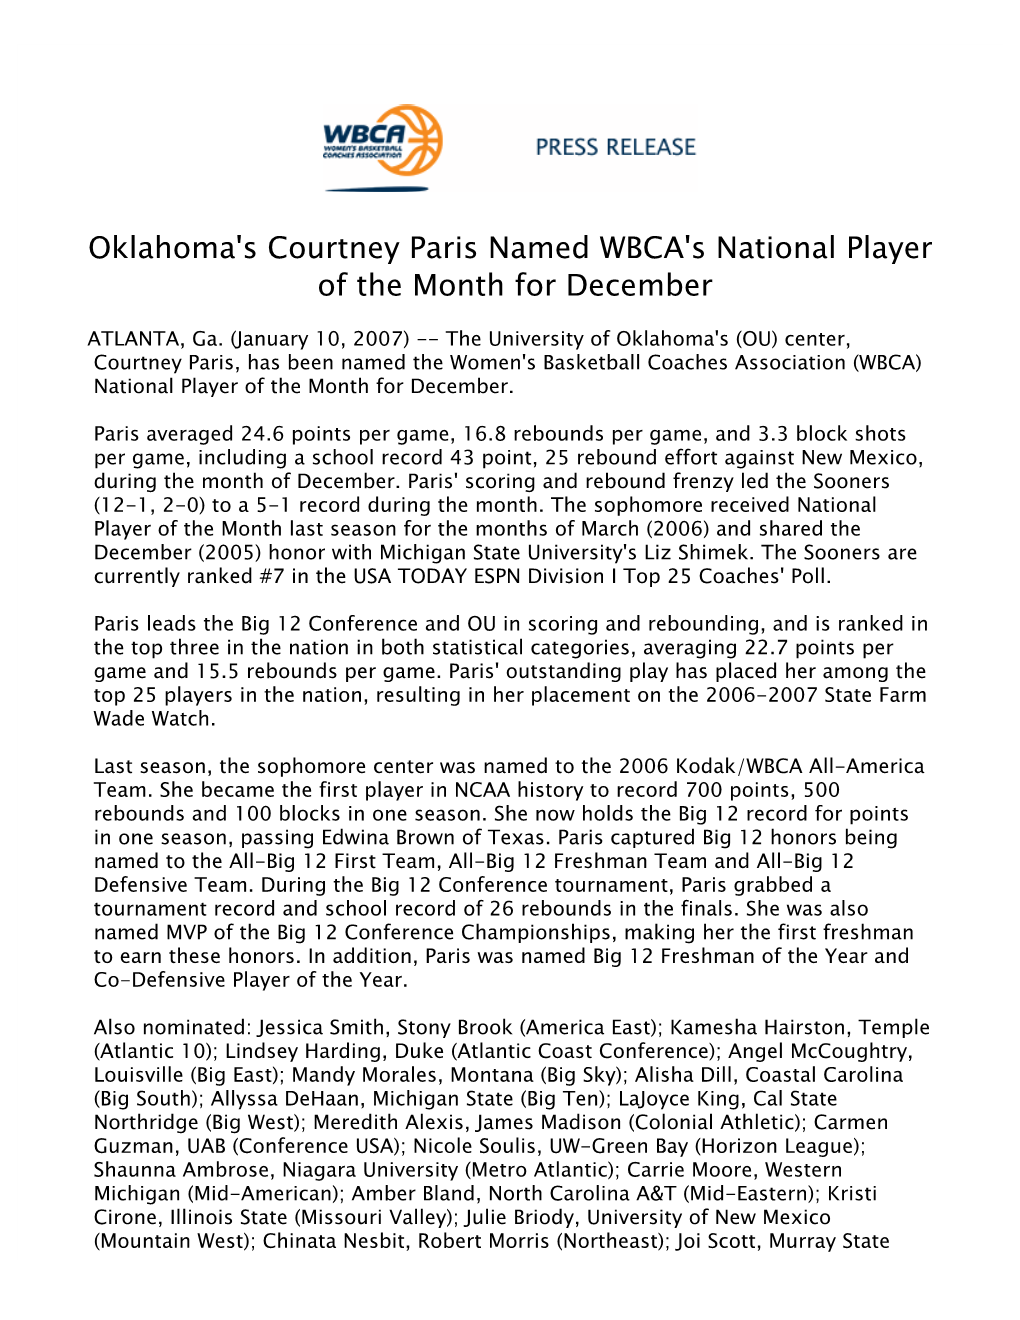 Oklahoma's Courtney Paris Named WBCA's National Player of the Month for December 2006-07 011007